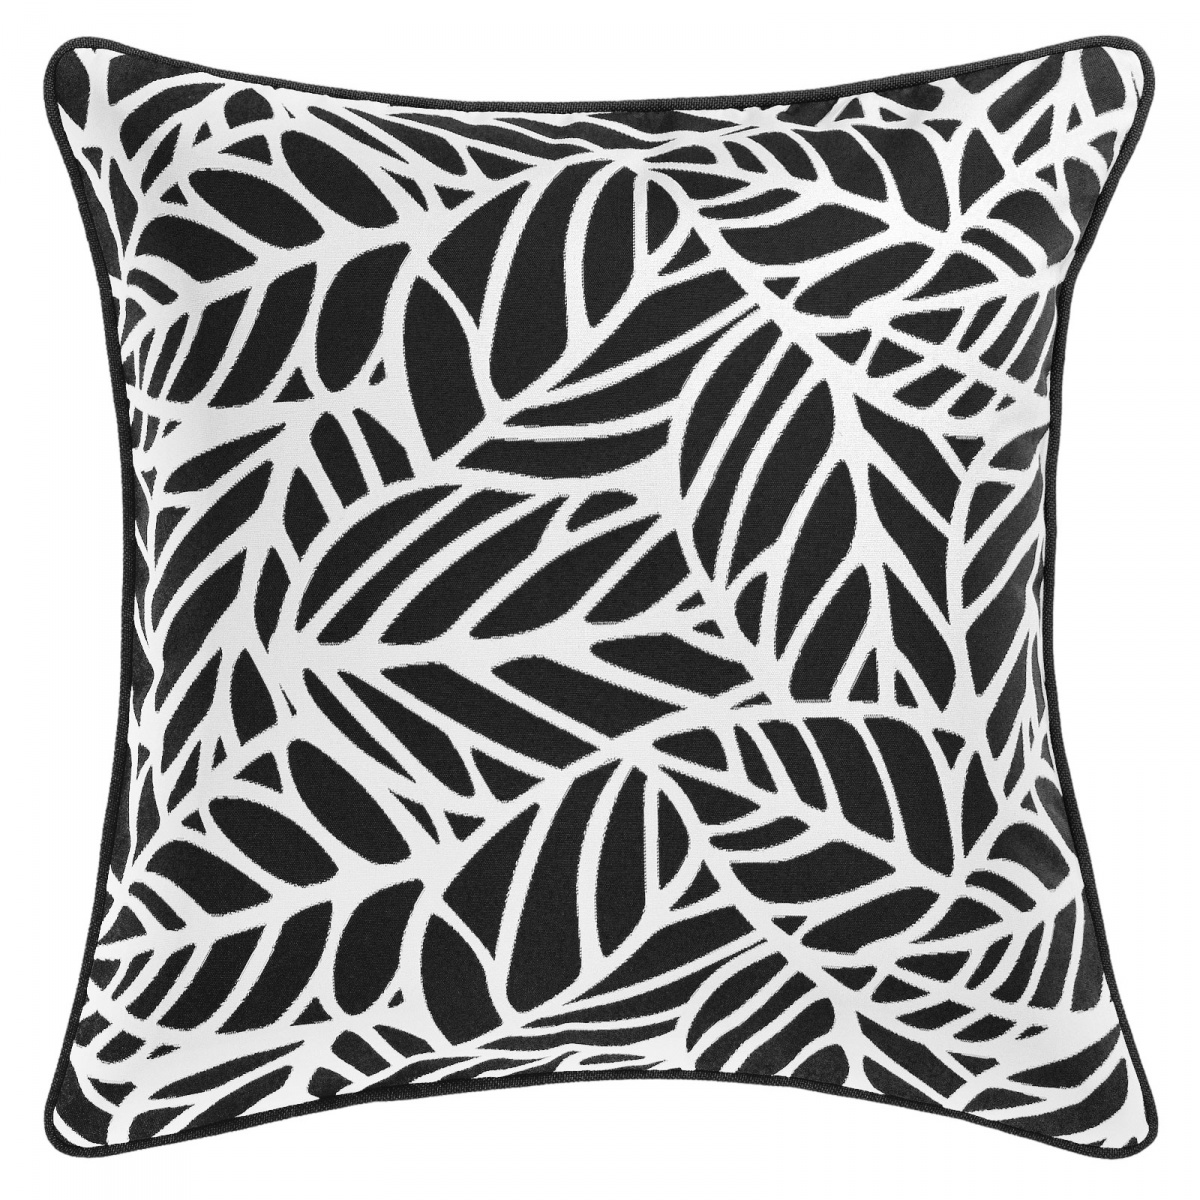 Tulum Ash Outdoor Cushion with Piping - 45x45cm